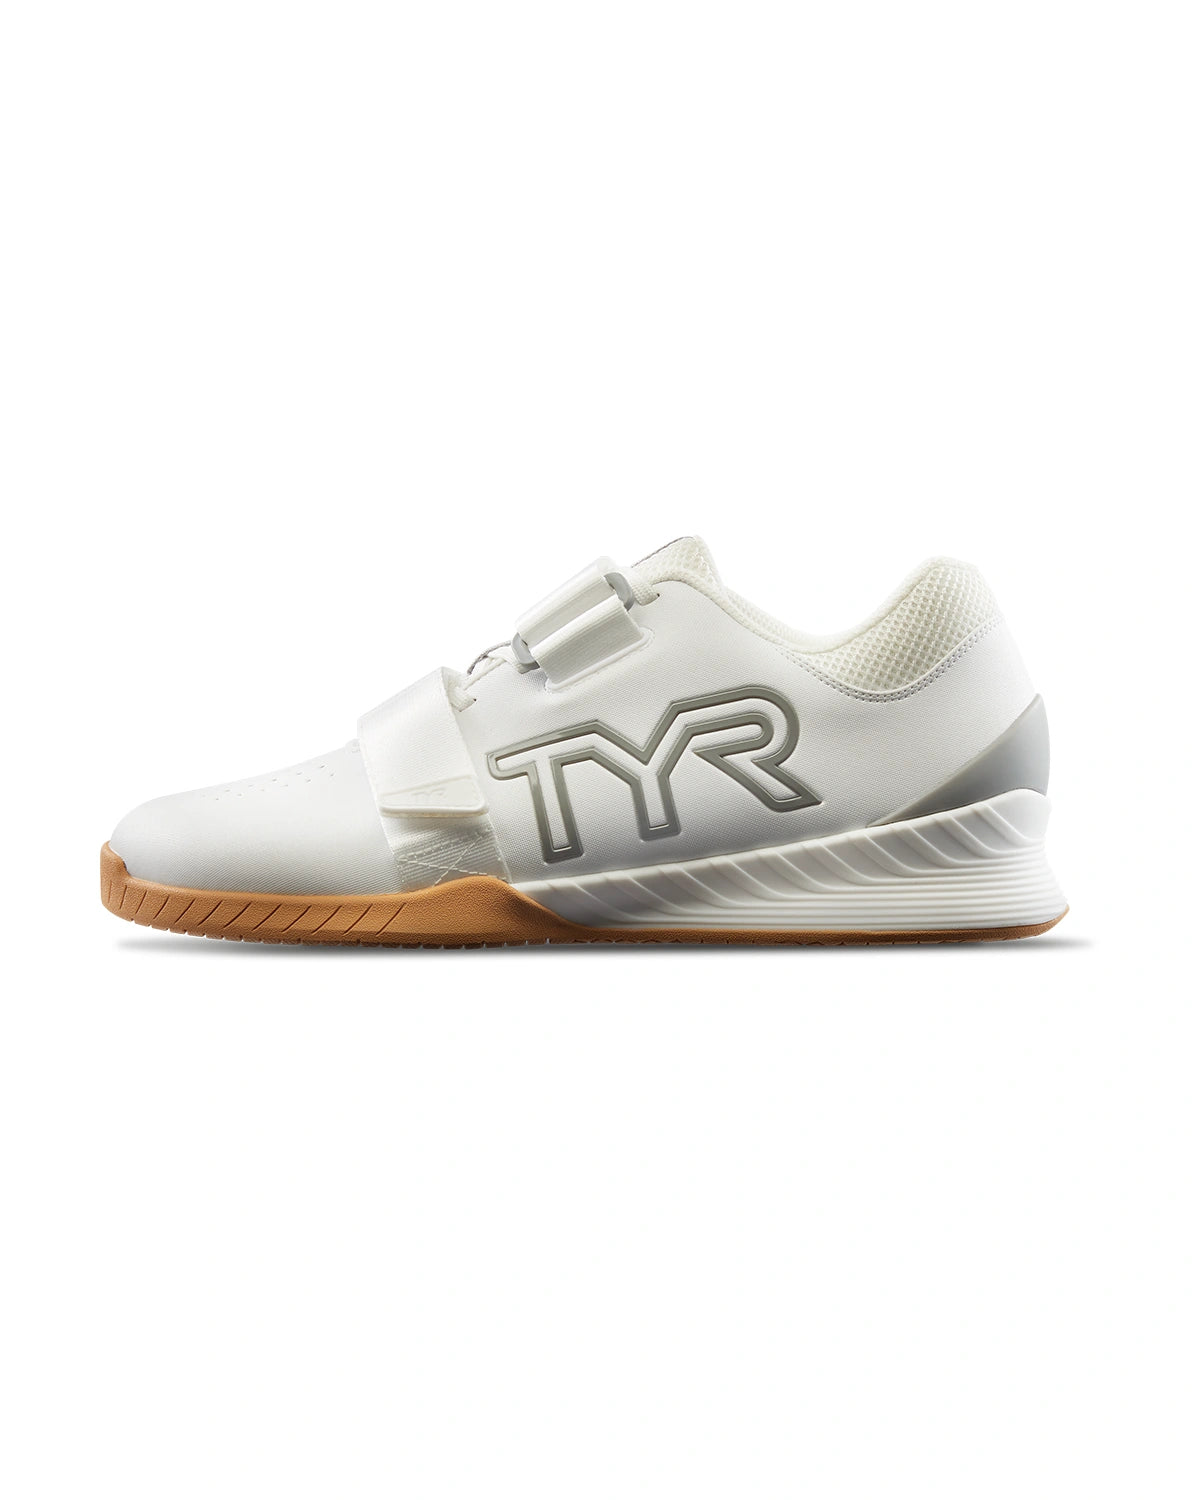 TYR L1 Lifter Weightlifting Shoe White / Gum